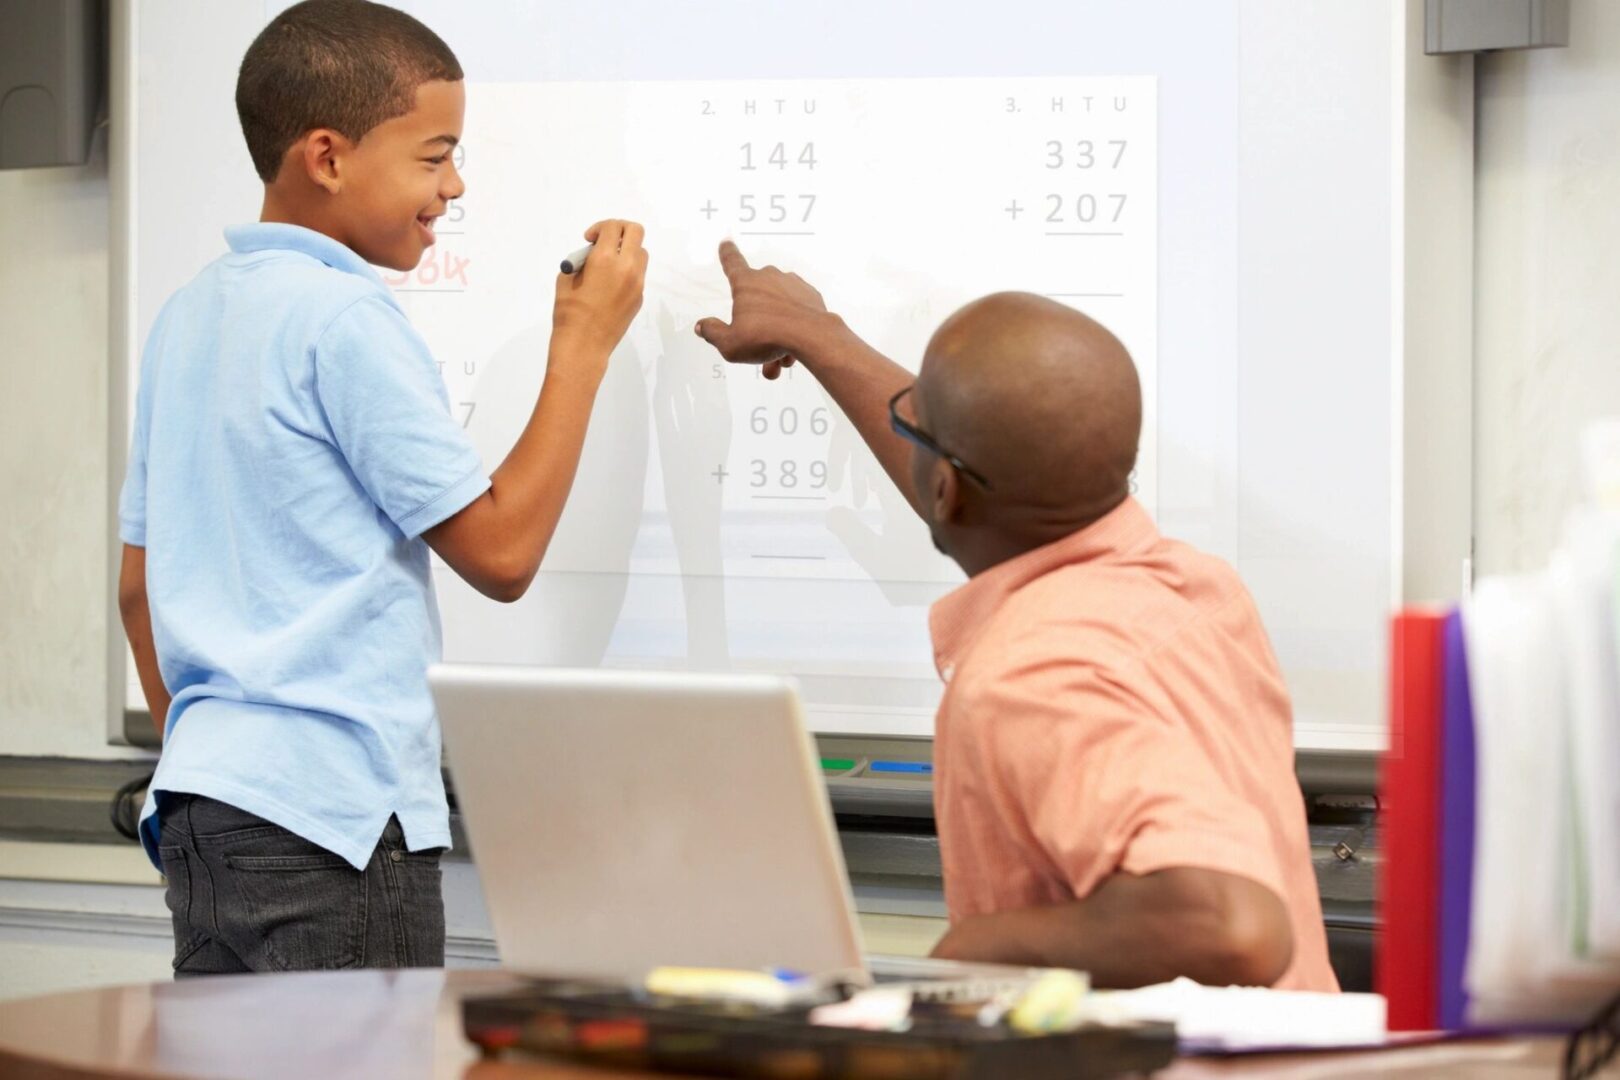 A man and boy are pointing at something on the whiteboard.